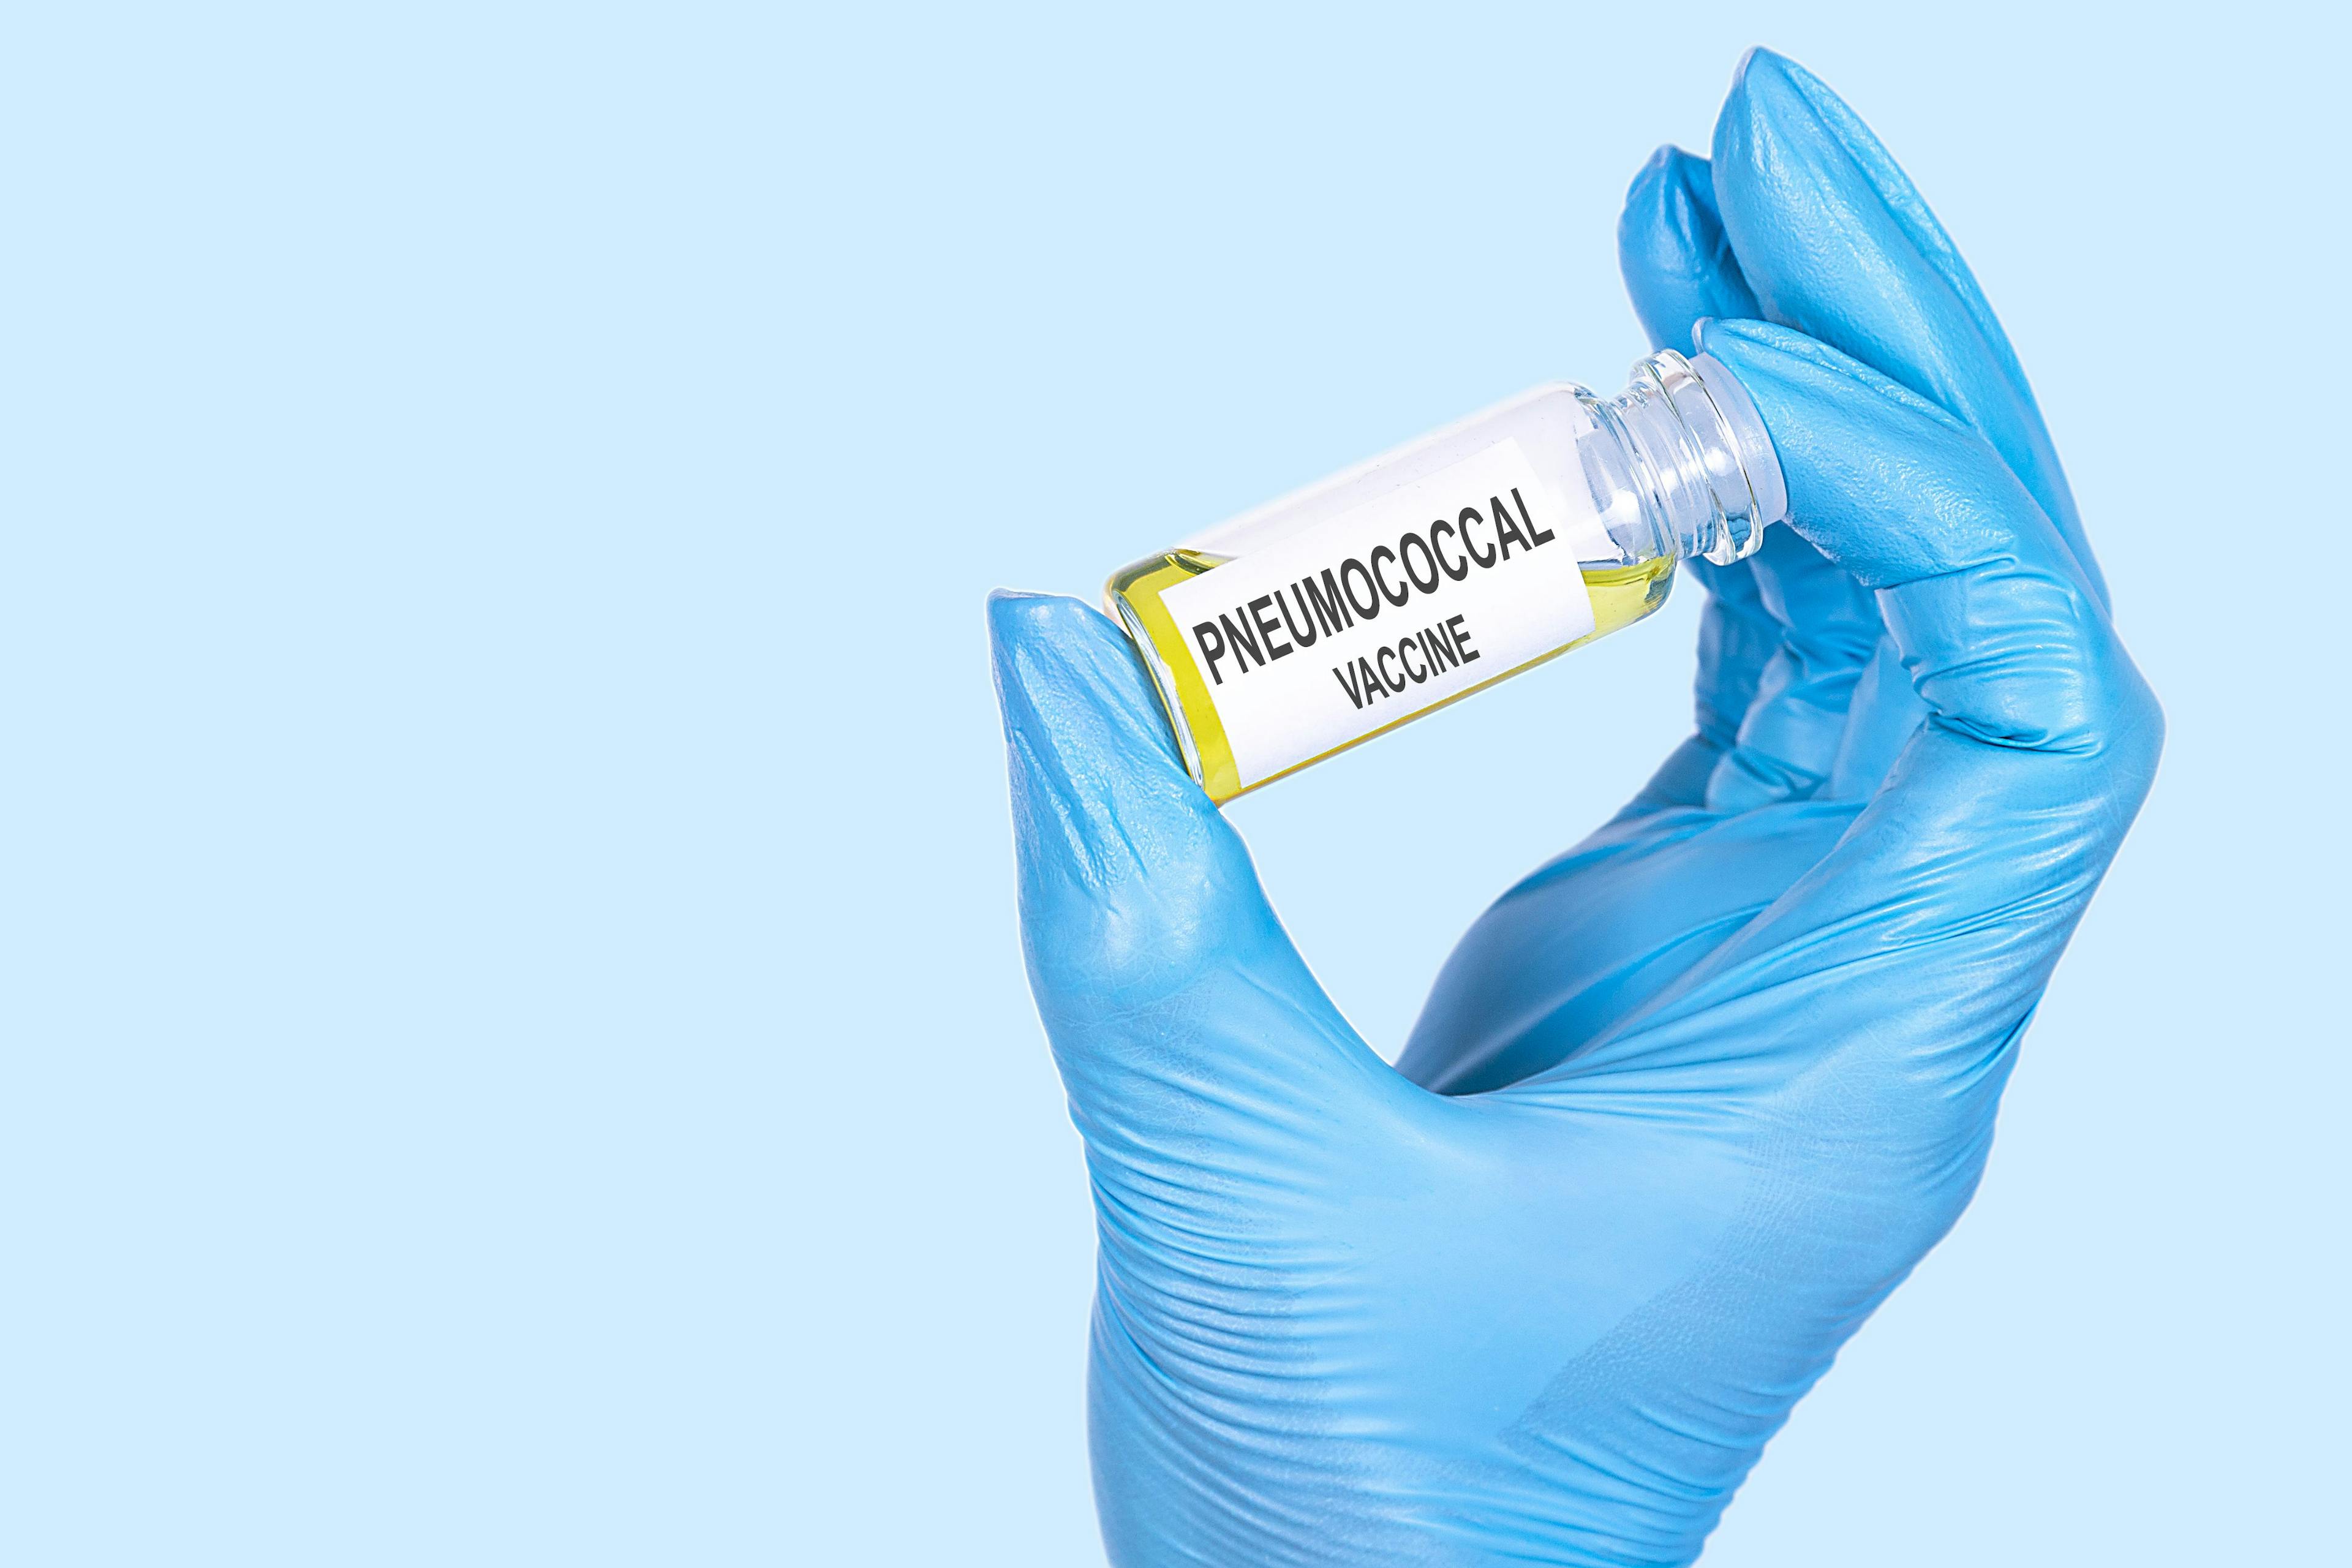 PNEUMOCOCCAL VACCINE text is written on a vial | Image Credit: Iryna - stock.adobe.com